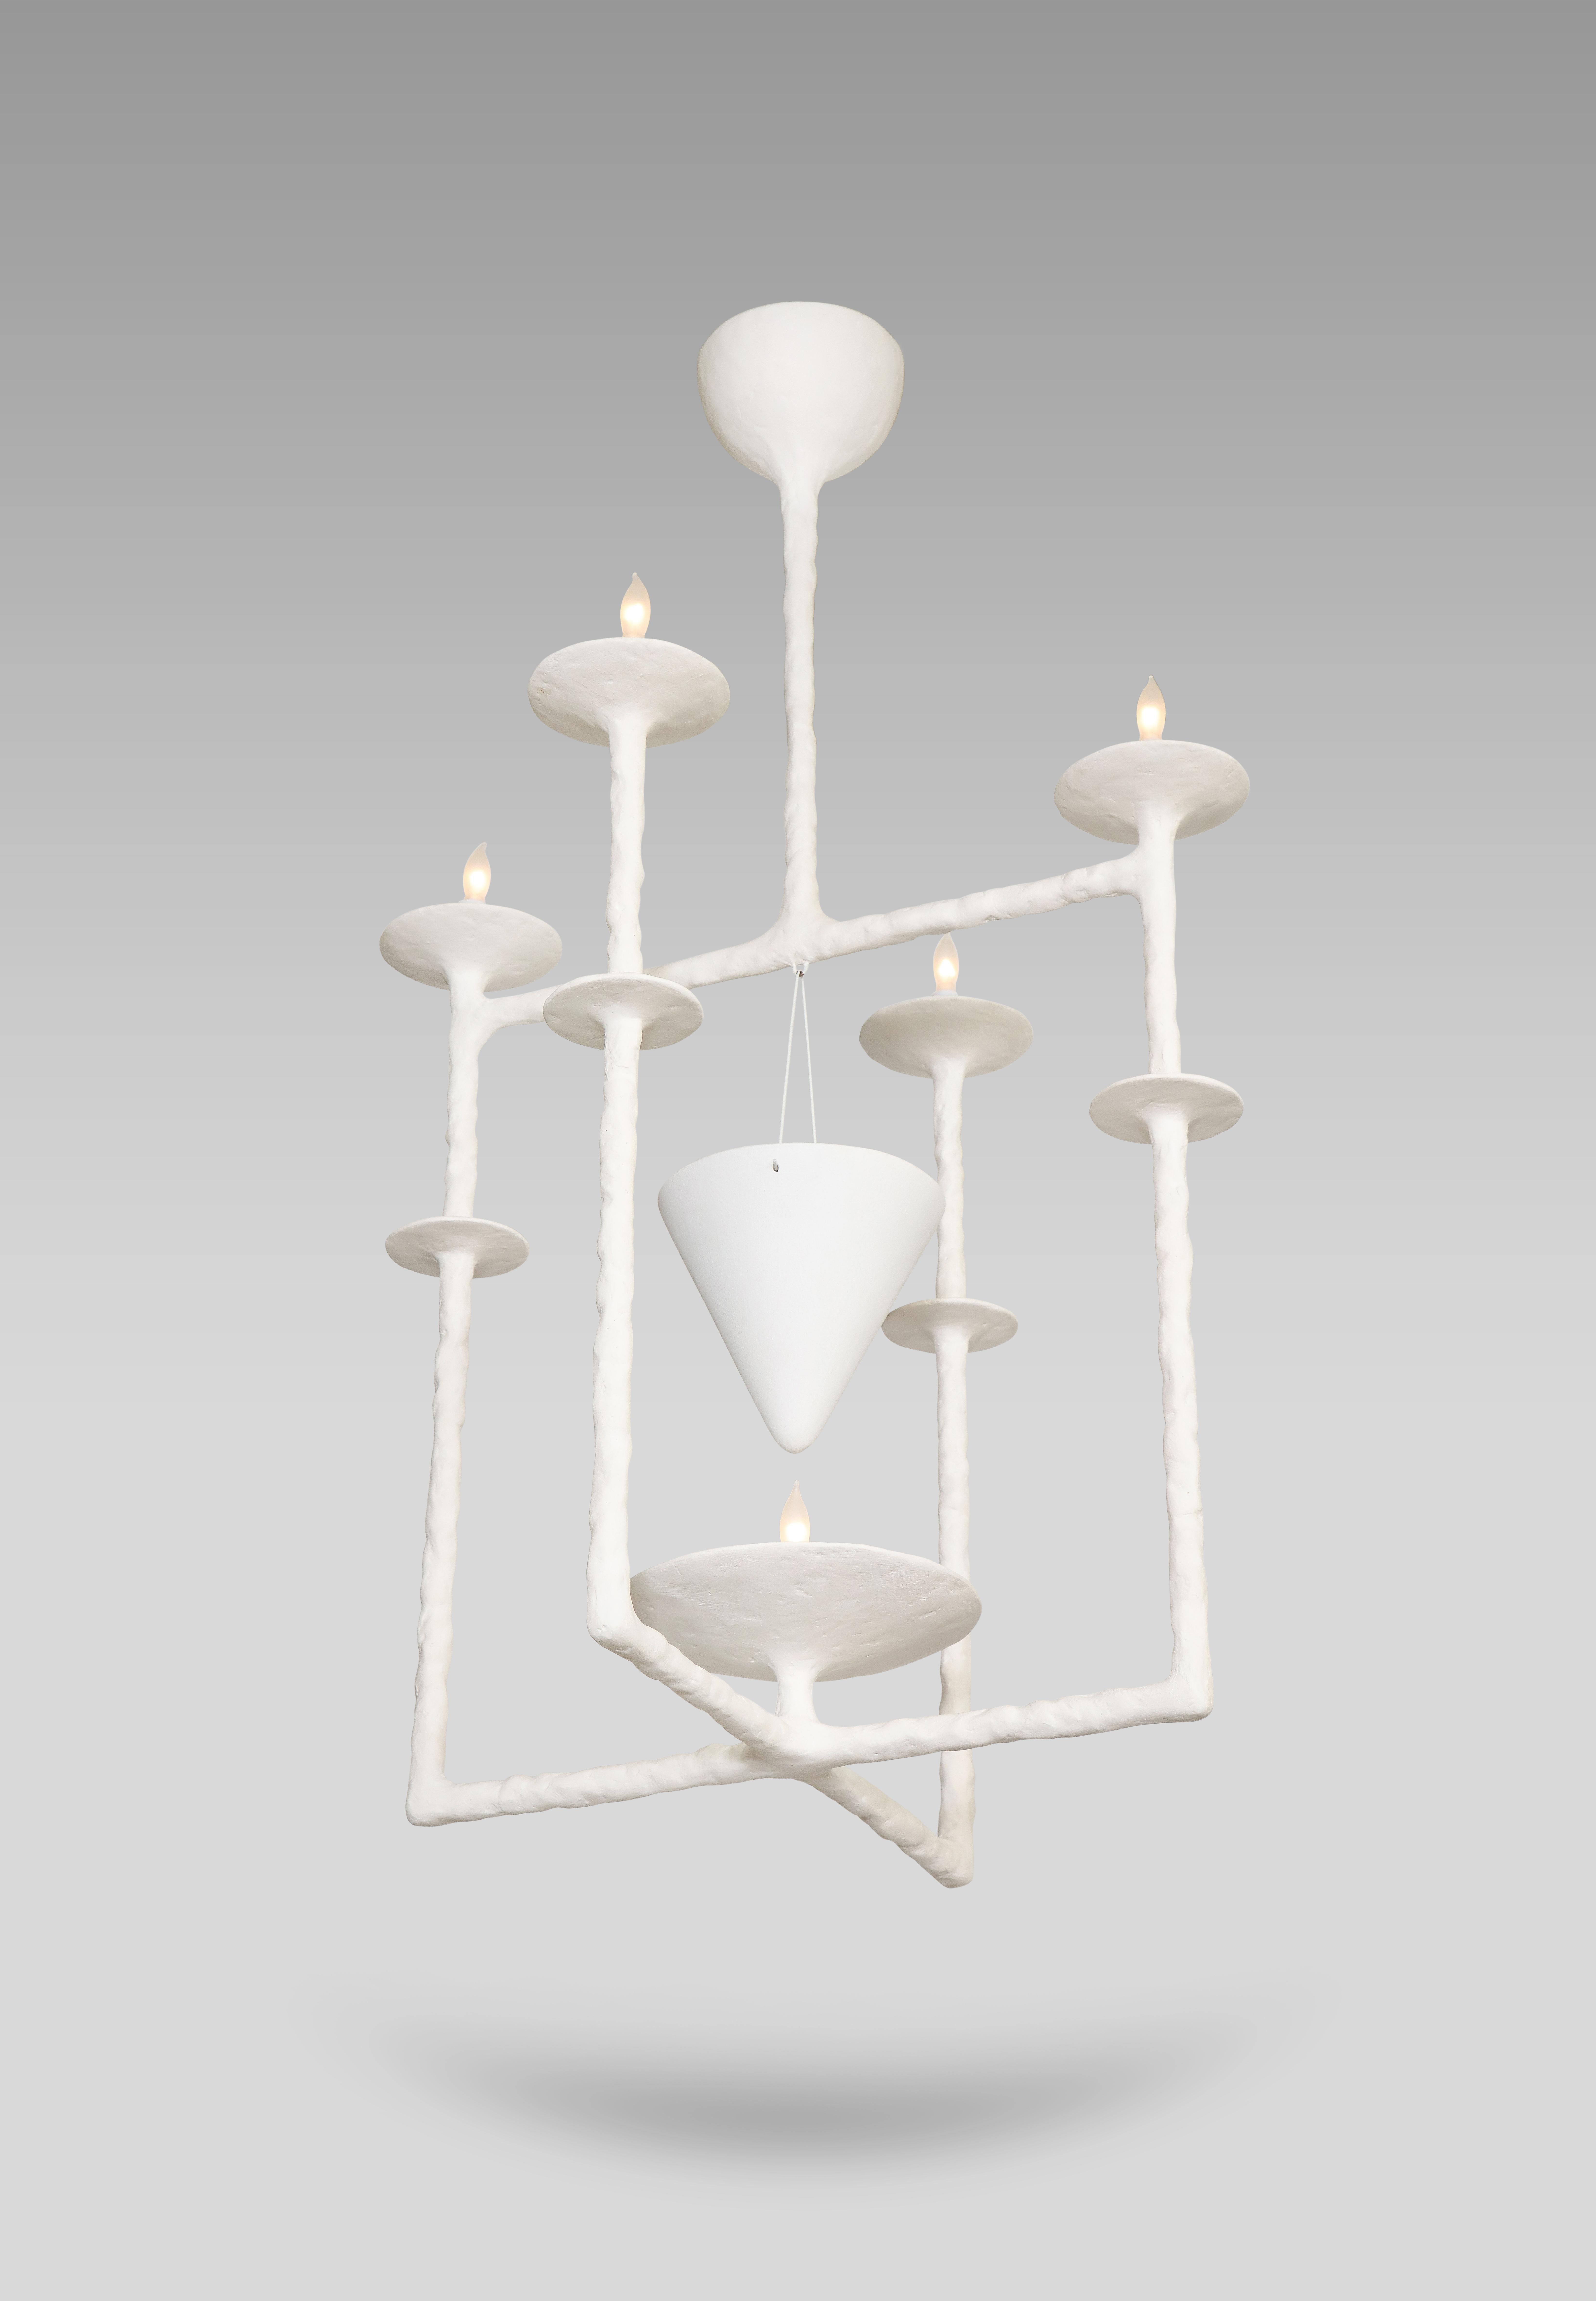 Delicate, handmade plaster form of intersecting square structures with four light sources. A very unusual, sculptural design. *This fixture comes outfitted with either 2-pin G4 or G9 sockets, both suitable for halogen or LED bulbs. G4 bulbs are